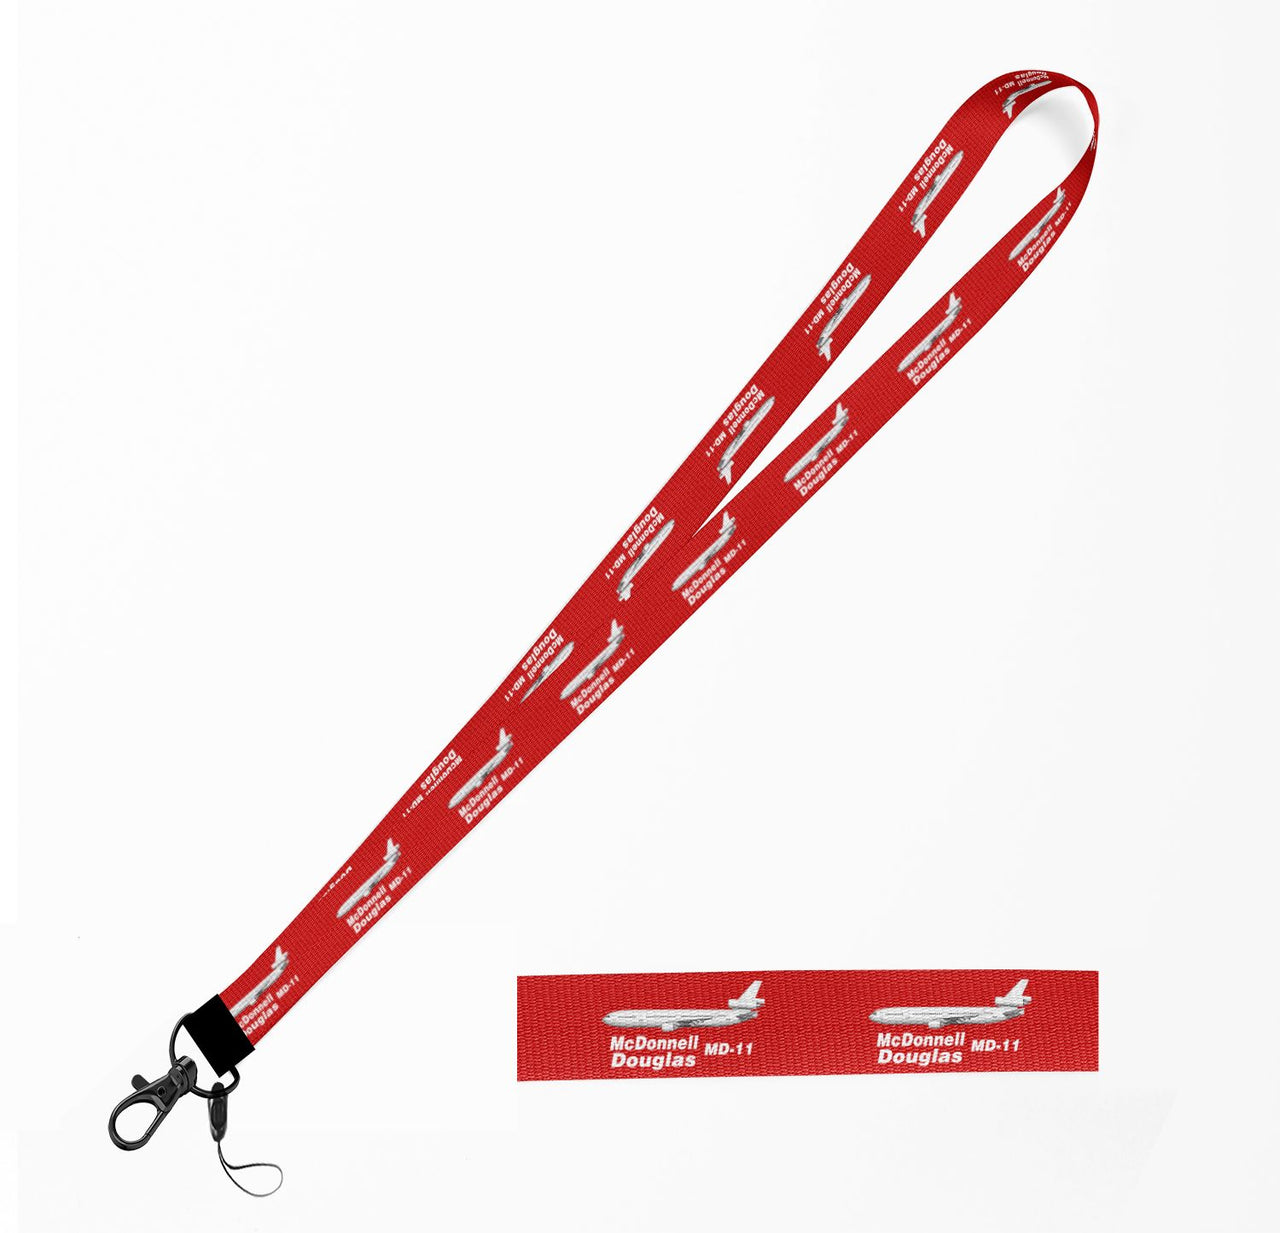 The McDonnell Douglas MD-11 Designed Lanyard & ID Holders